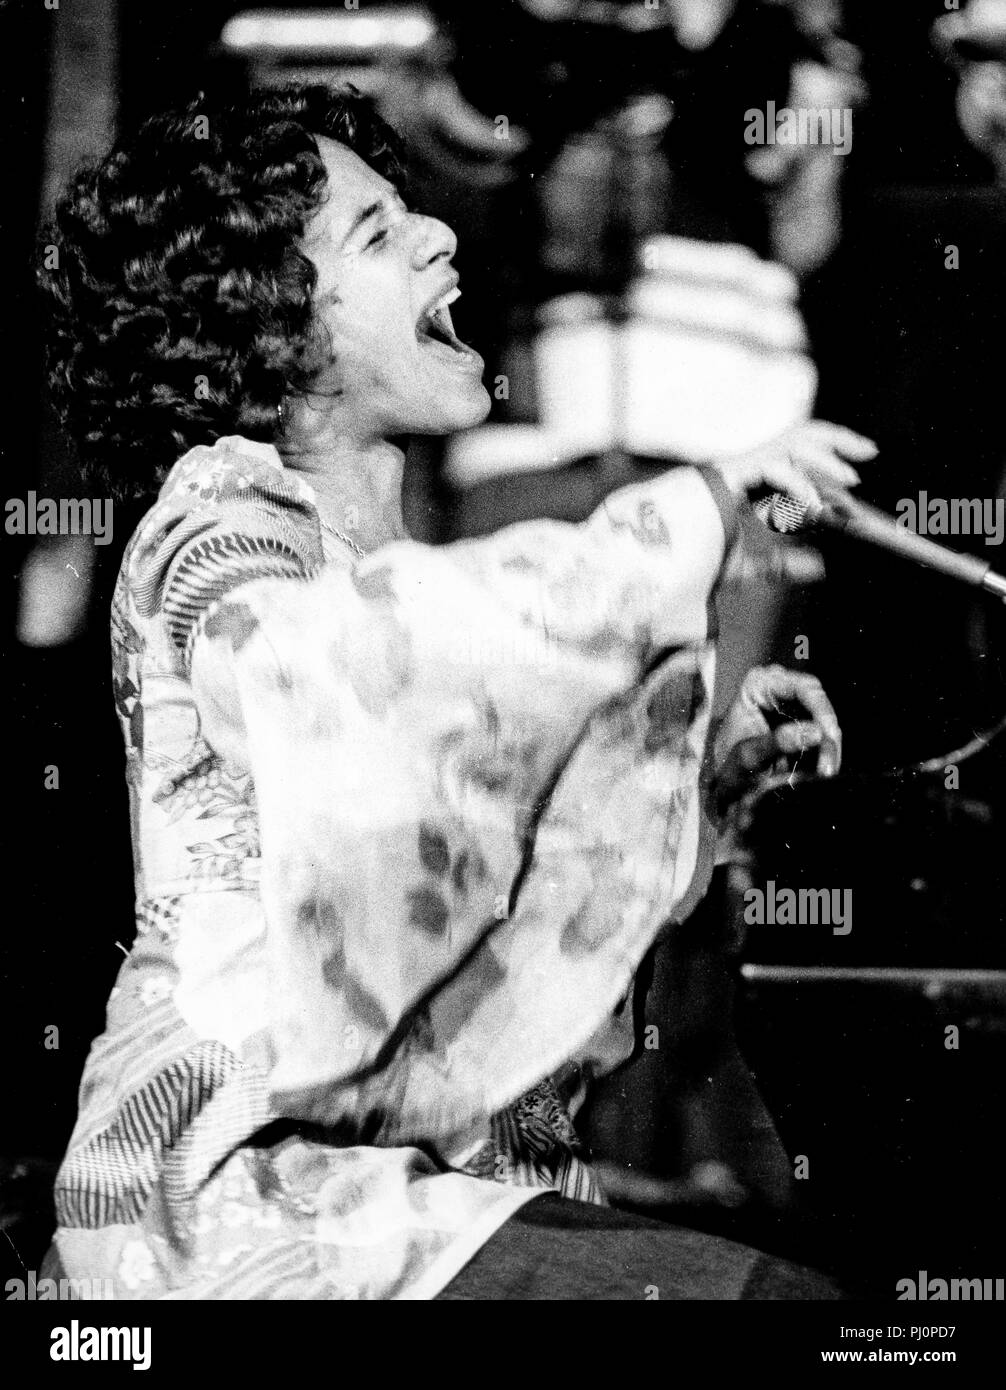 Carole King, Hammersmith Odeon, London 1972 Banque D'Images